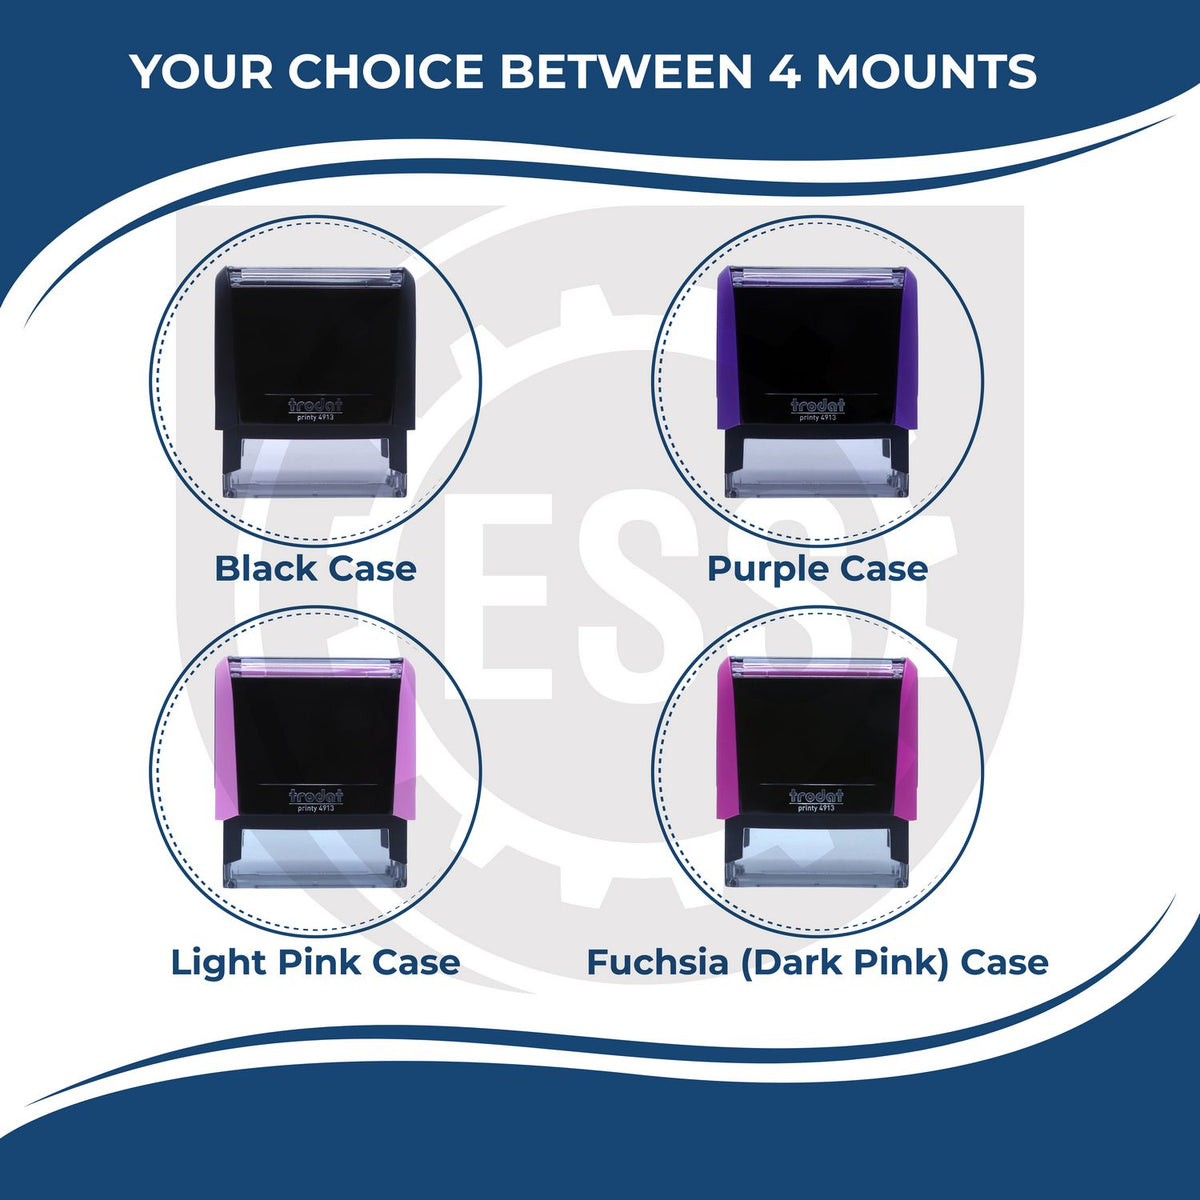 A picture of different colored mounts for the Self-Inking Rectangular Colorado Notary Stamp featurning a Red, Blue or Black Mount